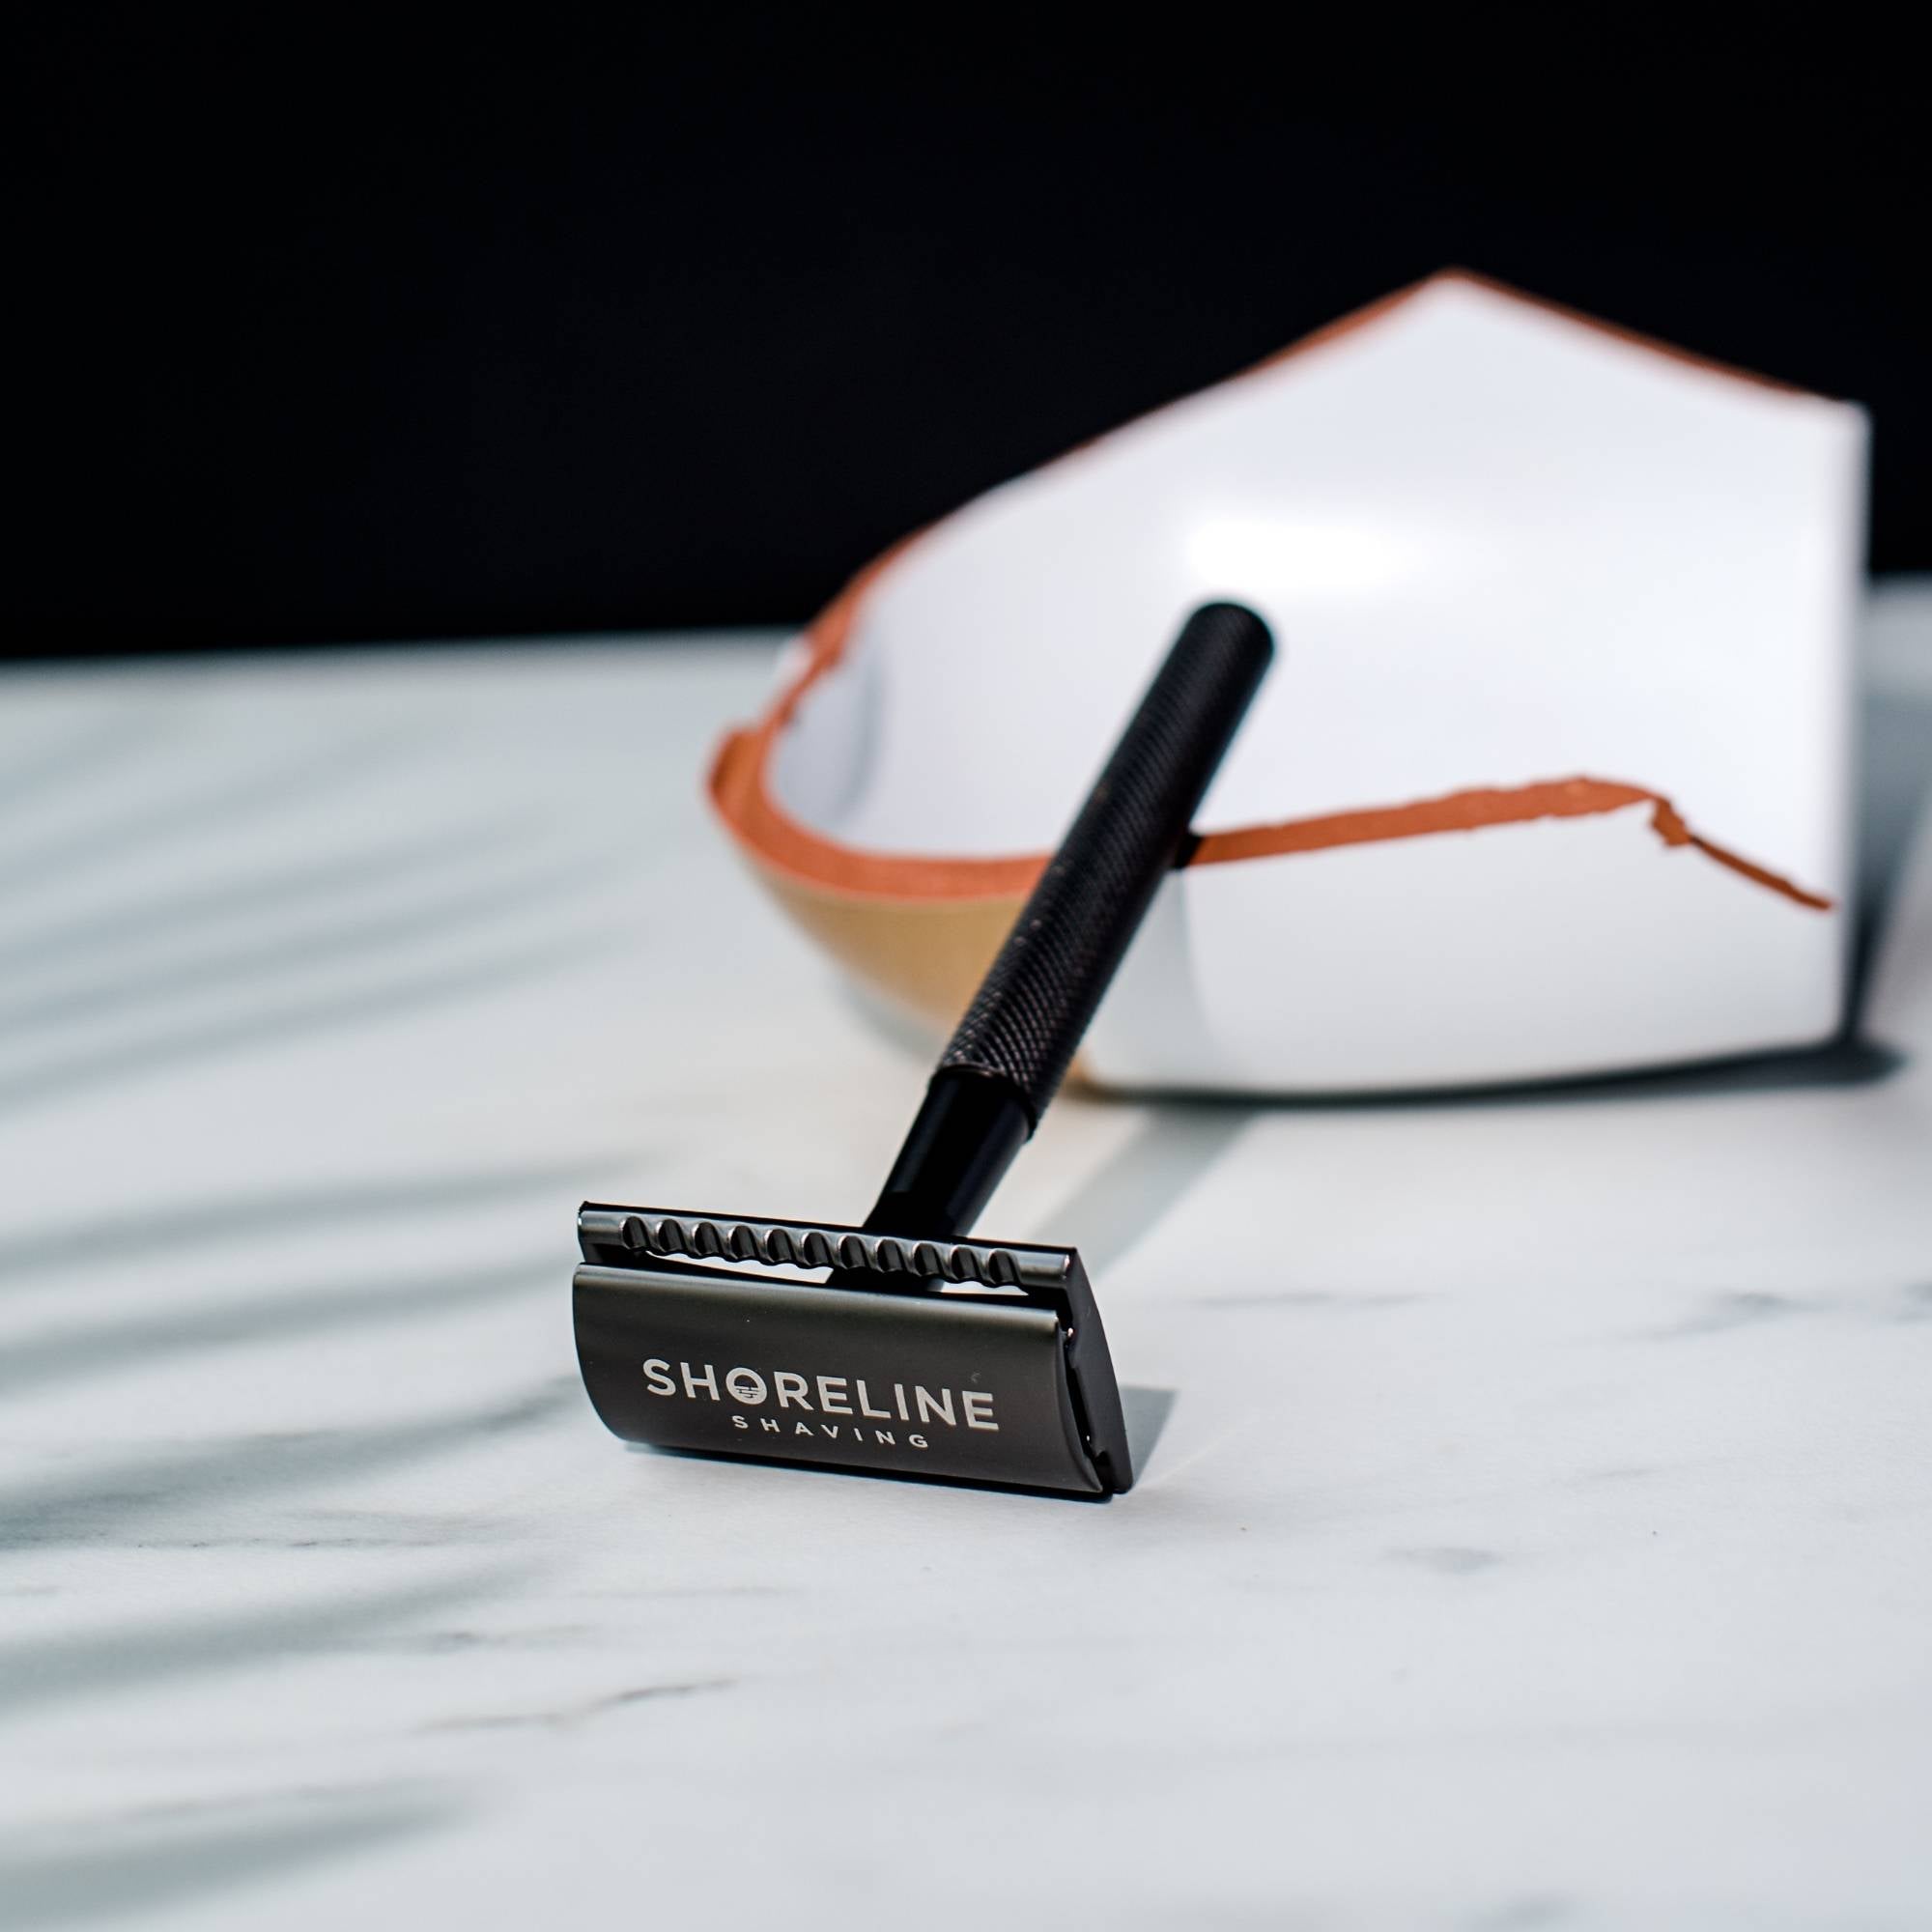 Closeup of matte black safety razor with the Shoreline Shaving logo in view